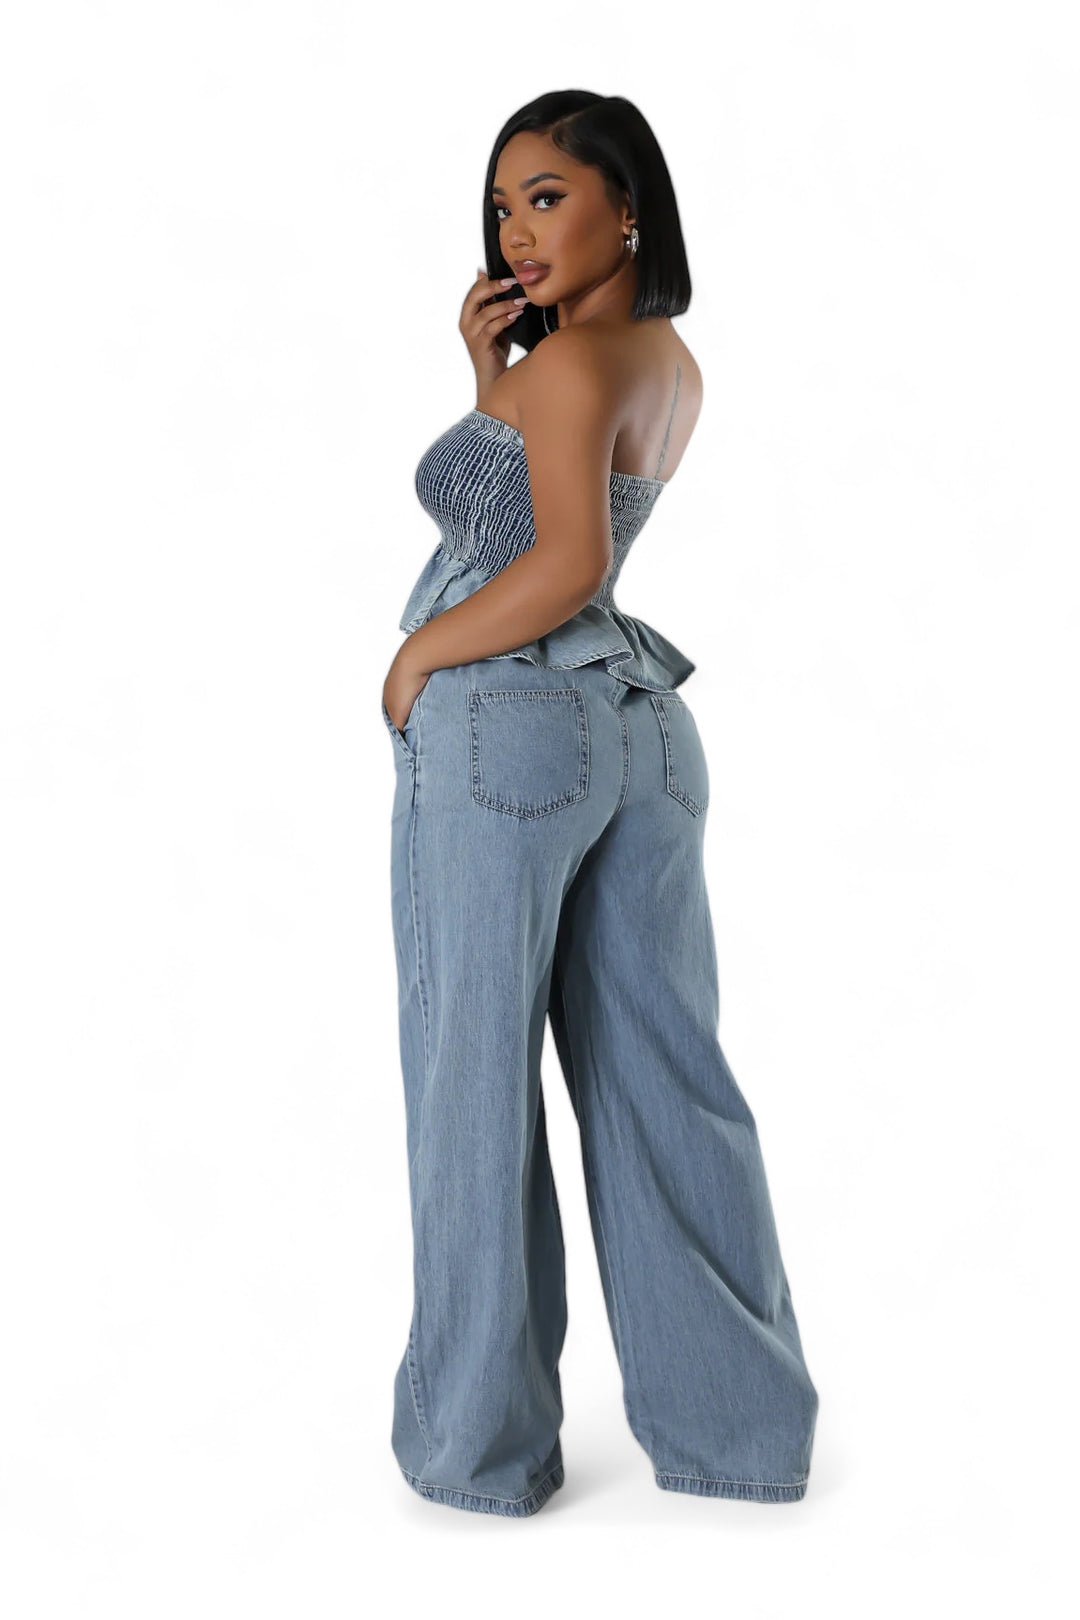 a woman in a denim jumpsuit talking on a cell phone